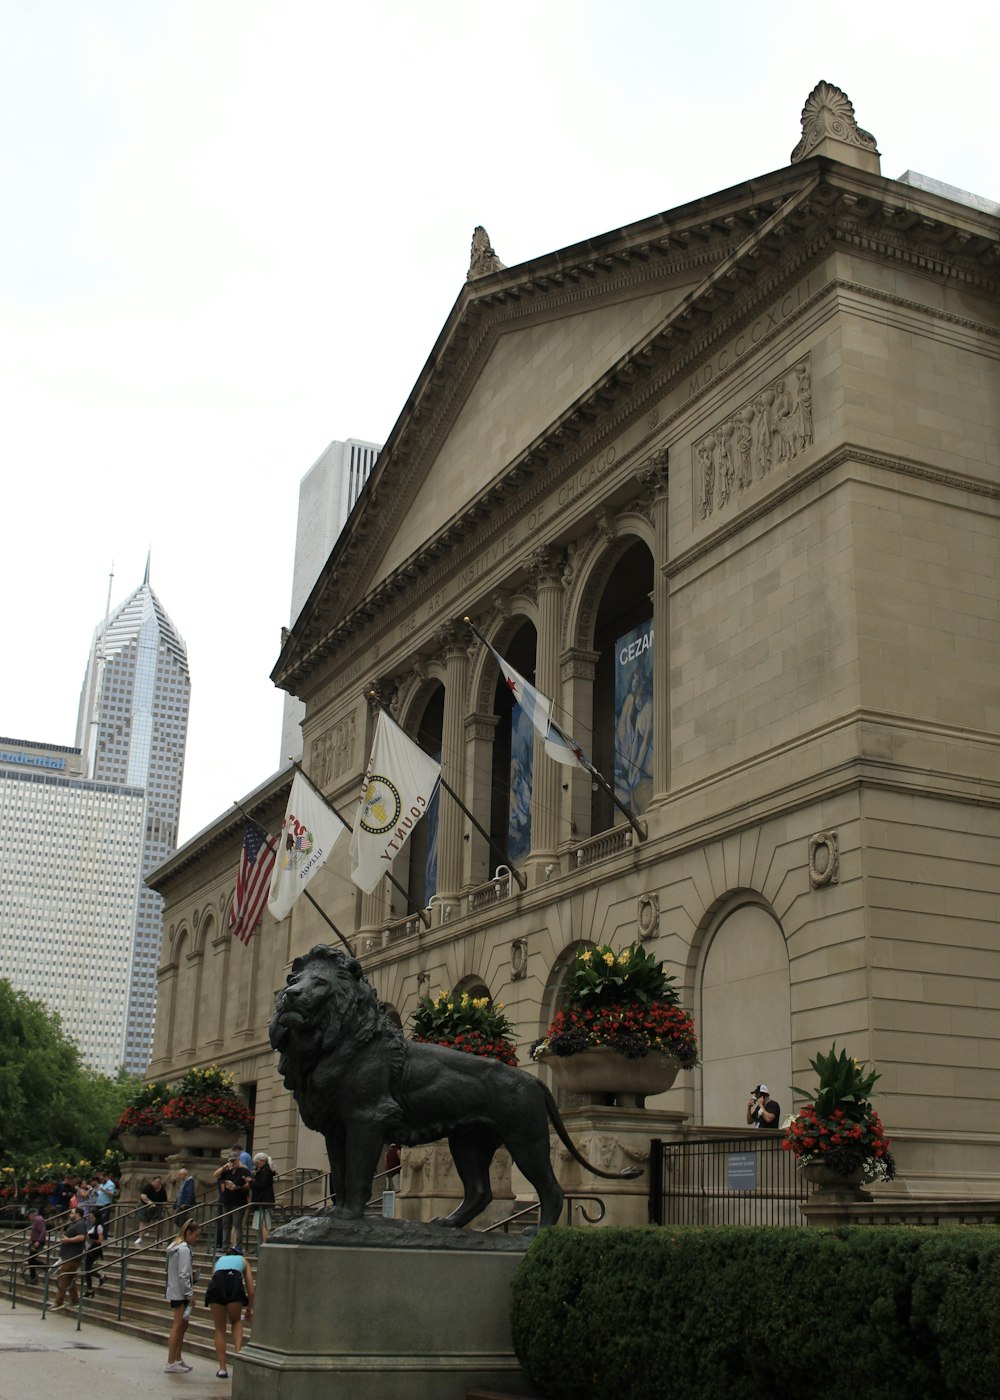 a statue of a lion in front of Art Institute of Chicago with a large clock tower